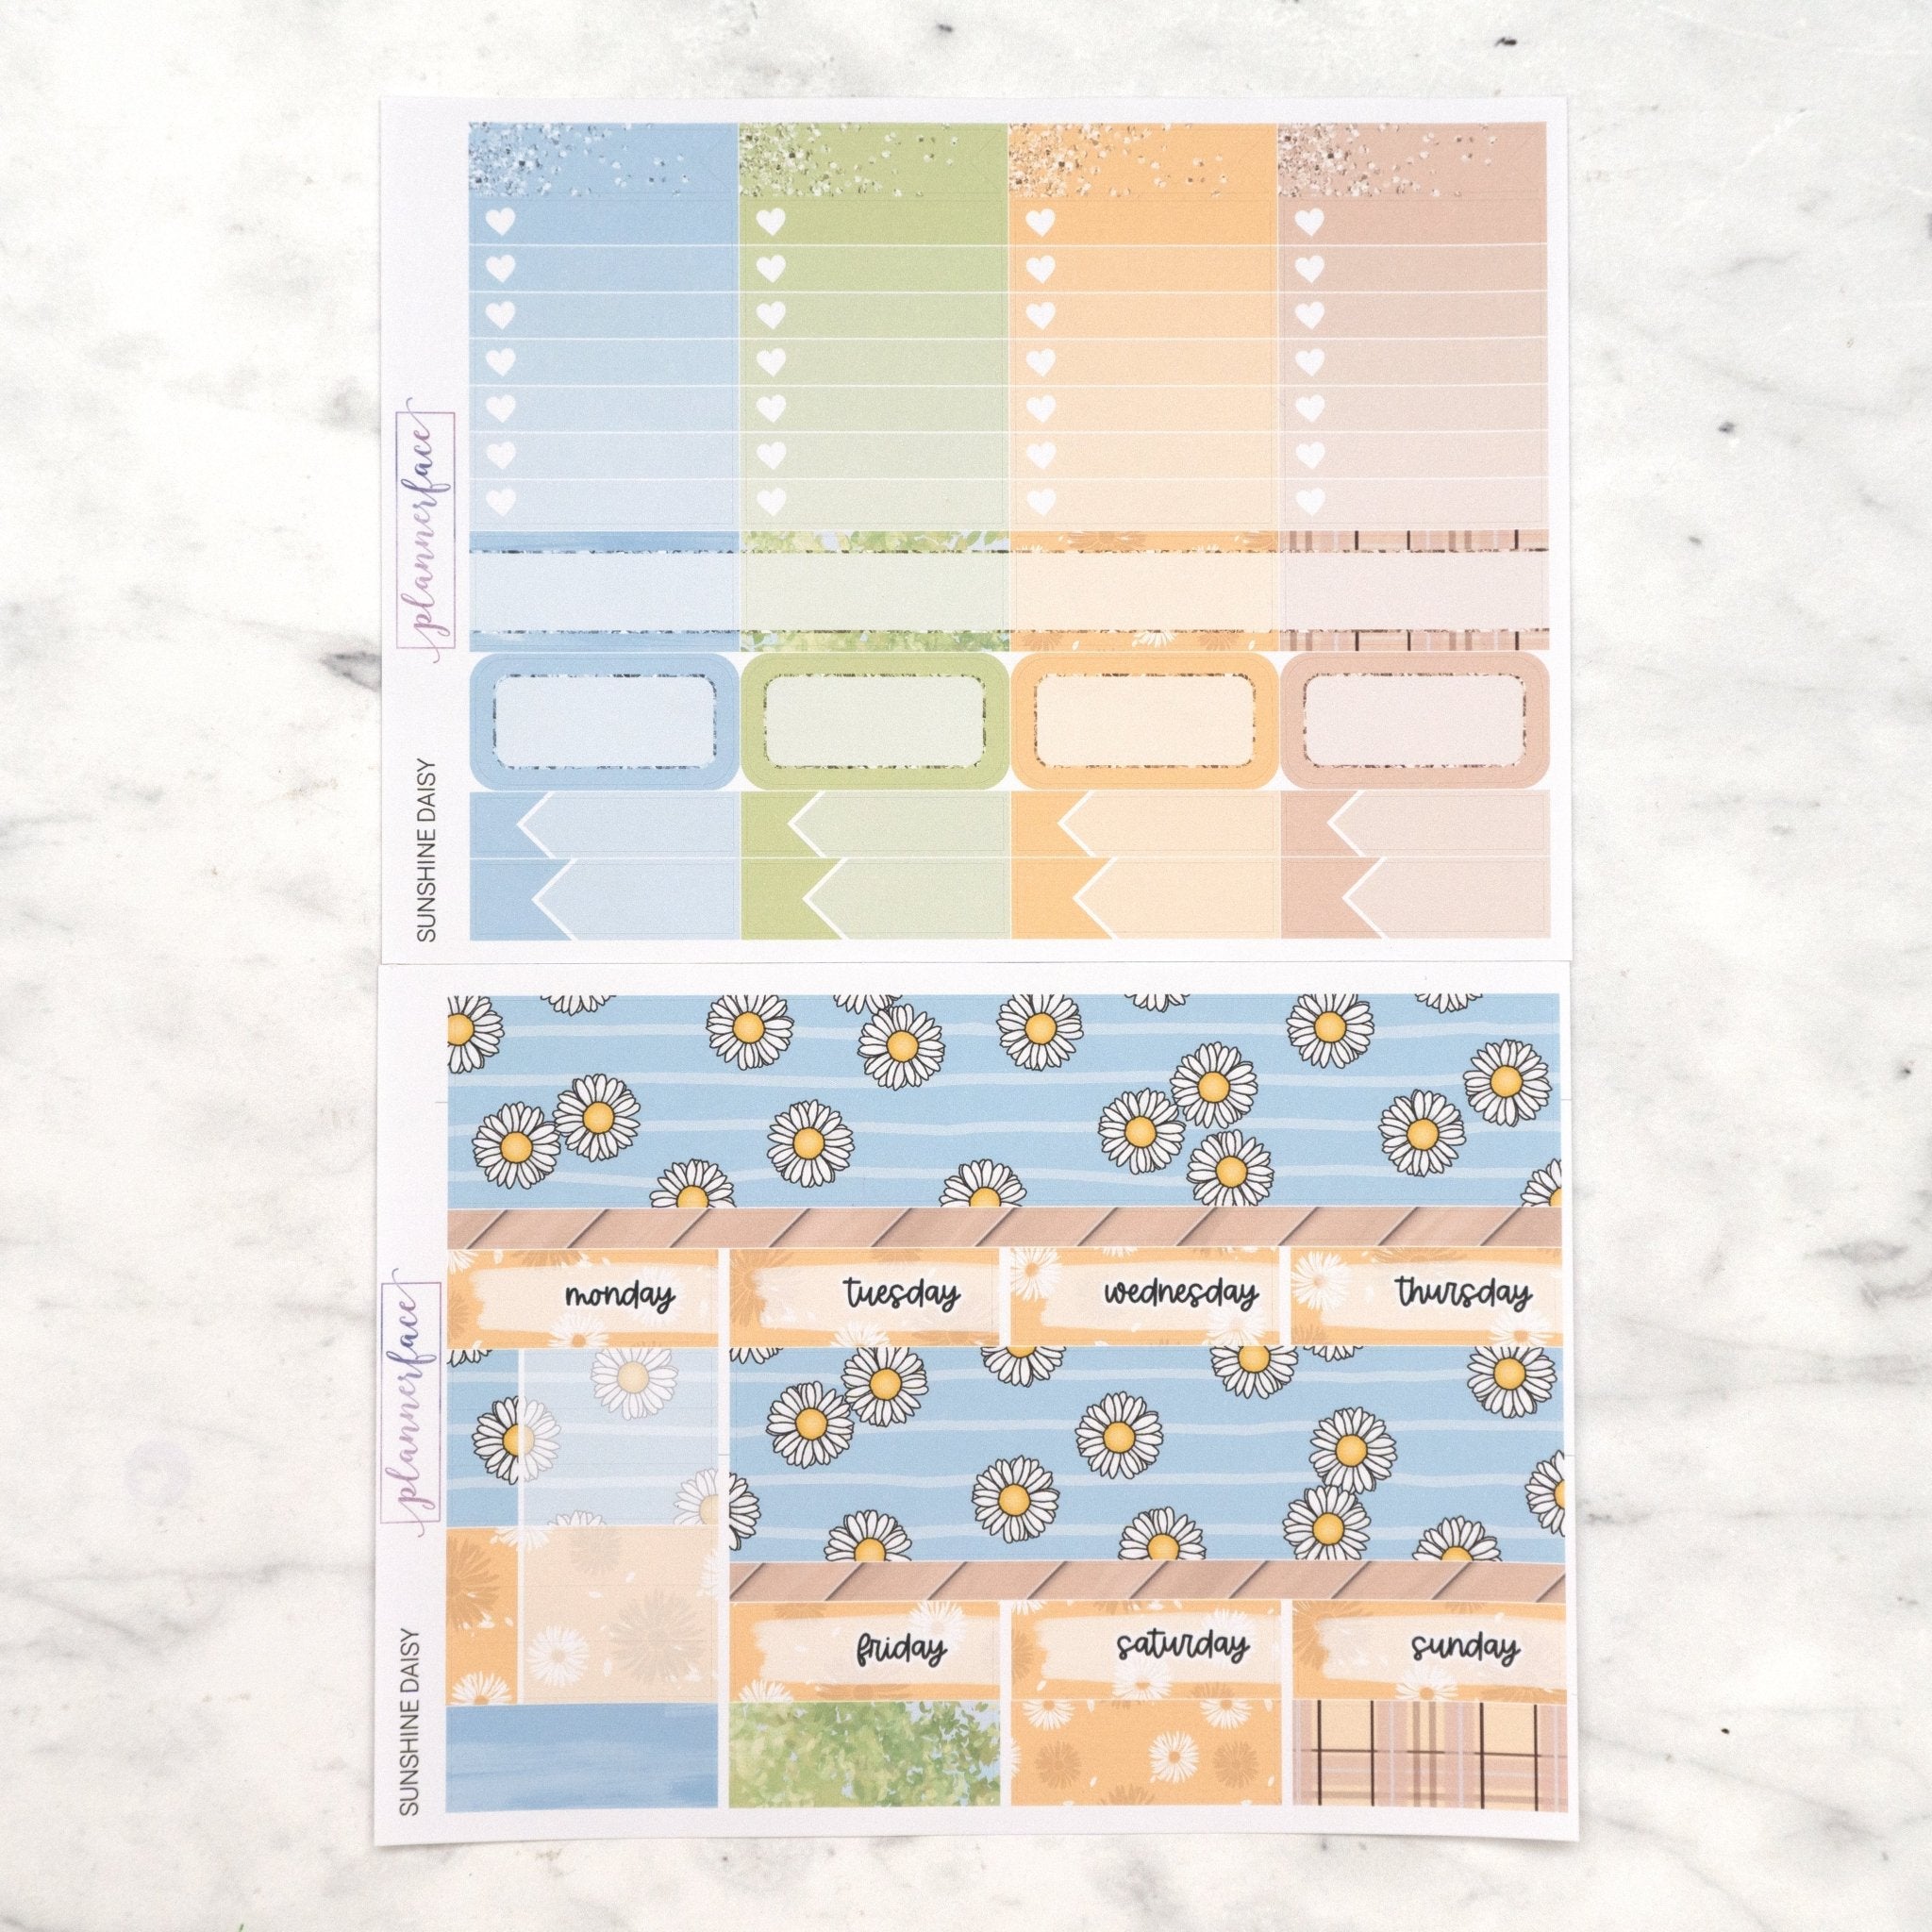 Sunshine Daisy Weekly Kit by Plannerface